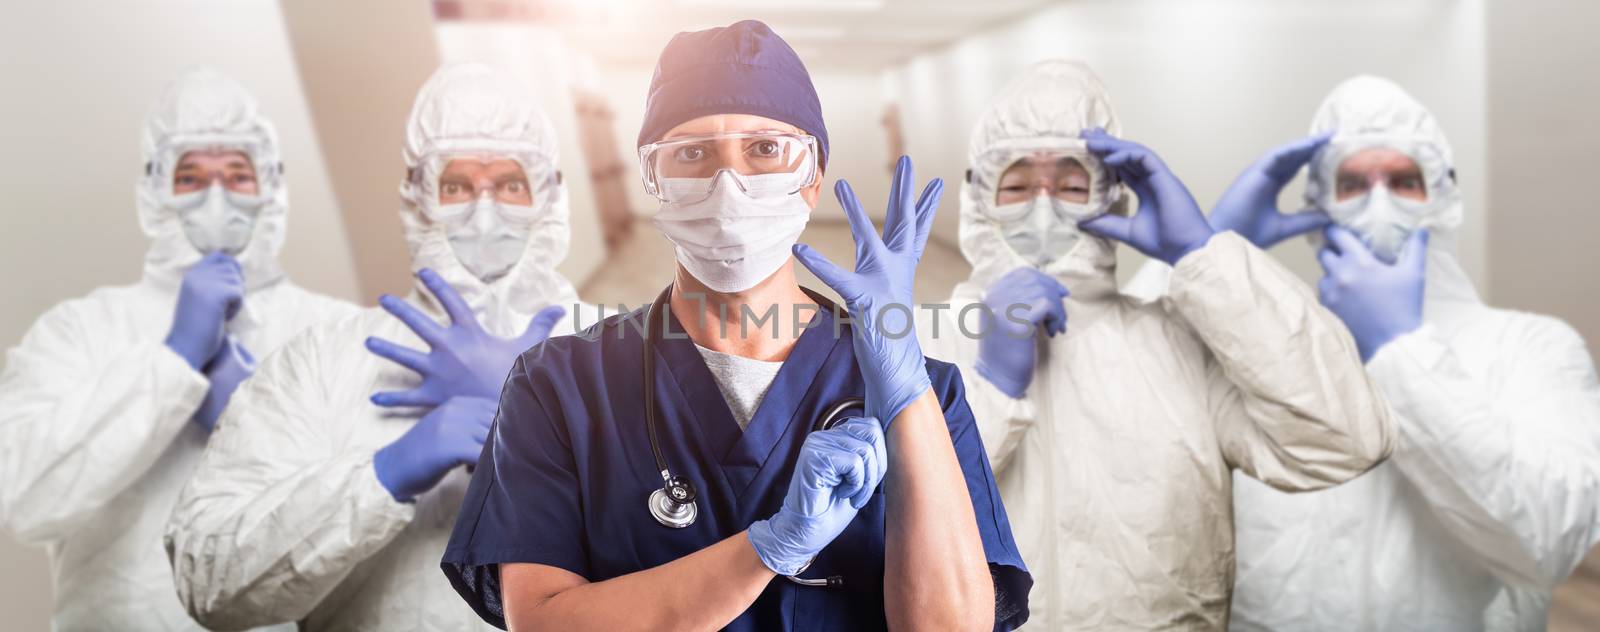 Team of Female and Male Doctors or Nurses Wearing Personal Prote by Feverpitched